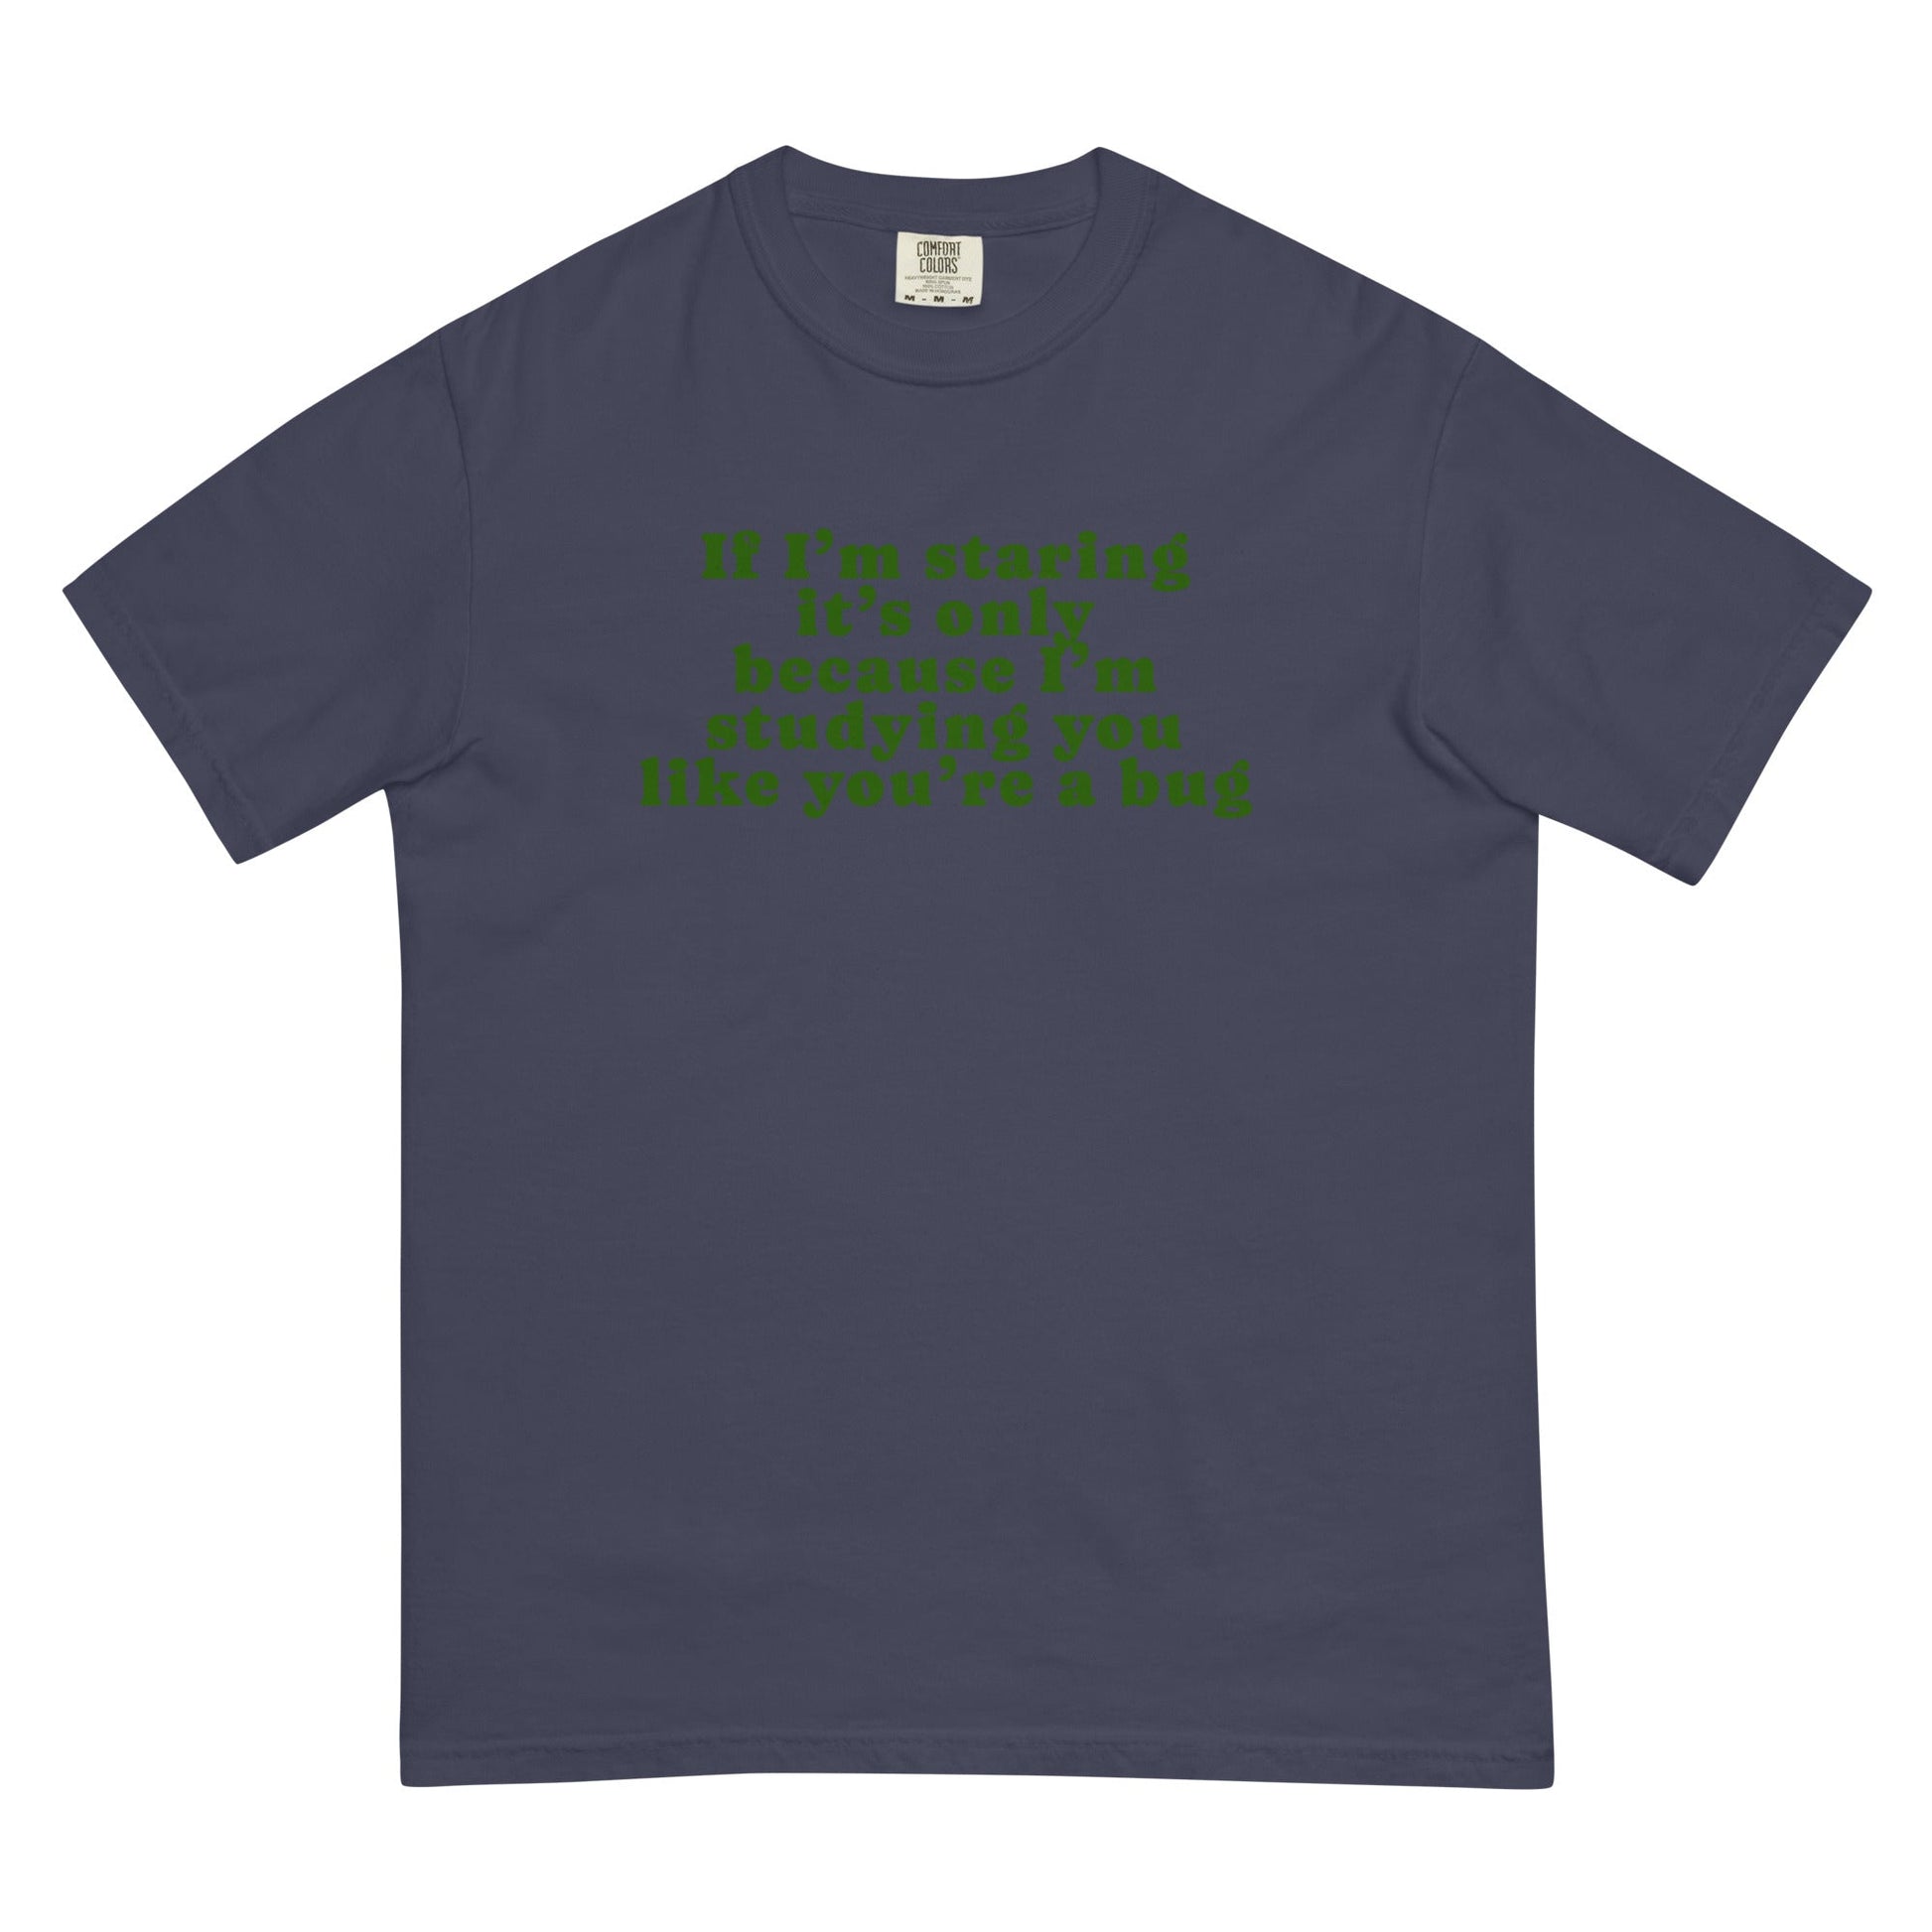 "I'm studying you like a bug" t-shirt - The Nerd Supply Company